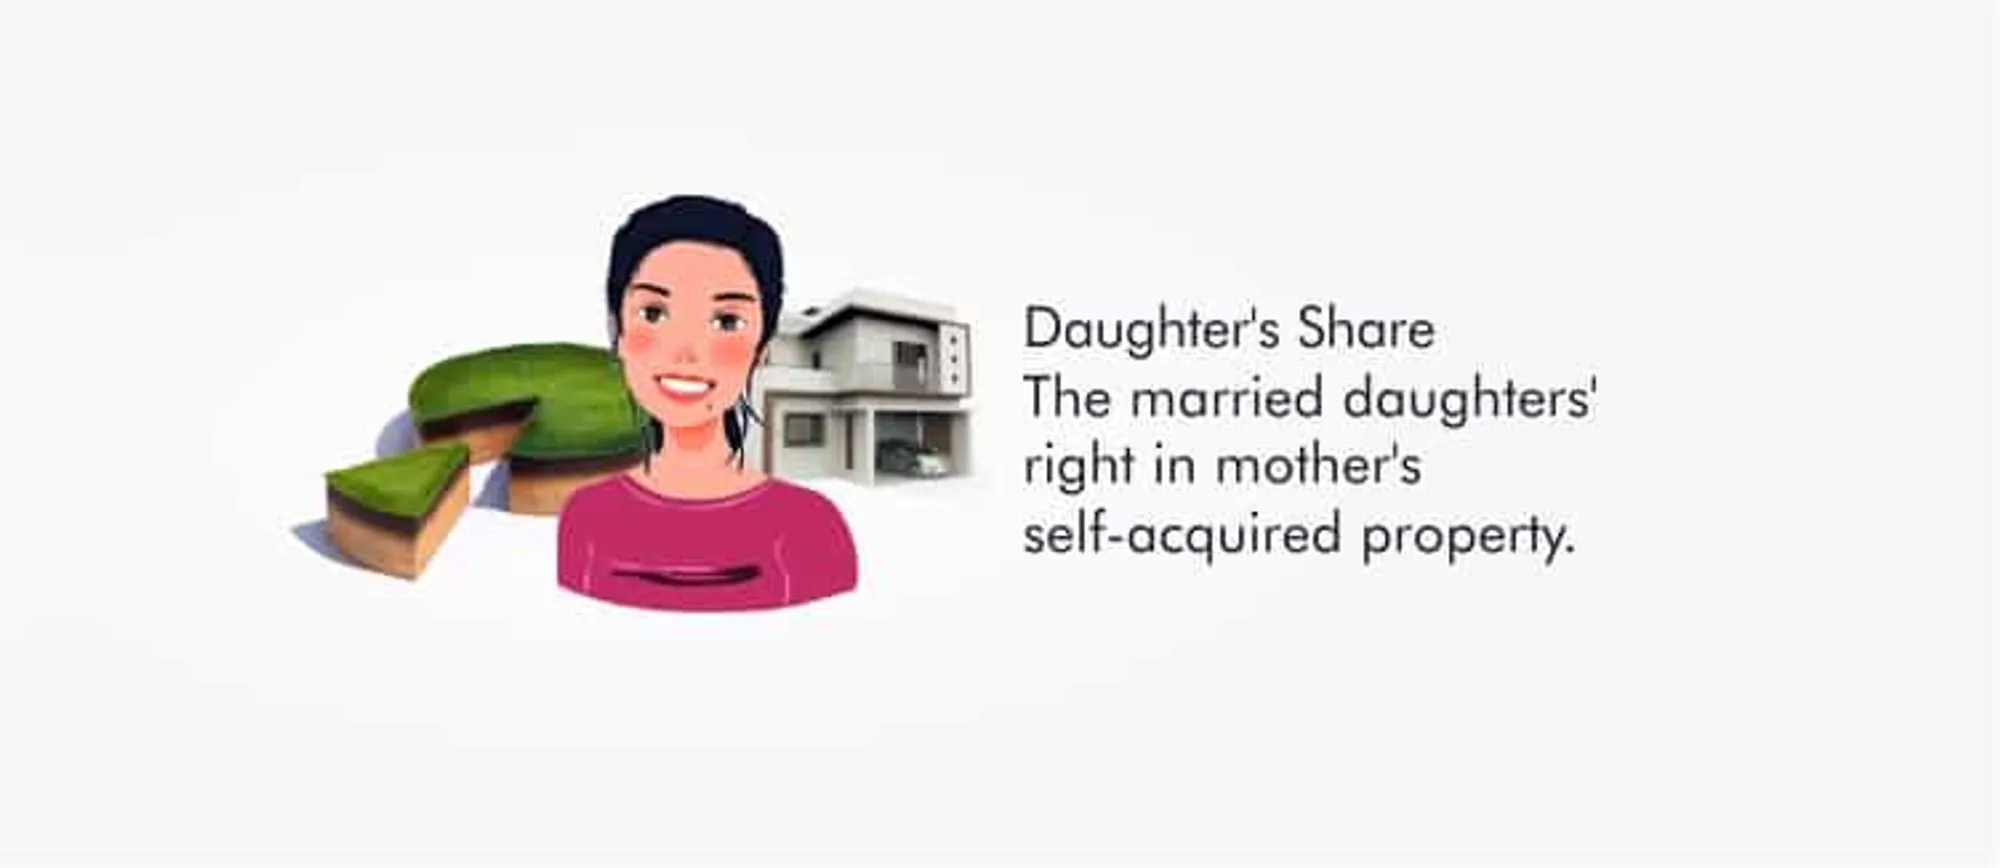 The married daughters’ right in mother’s self-acquired property